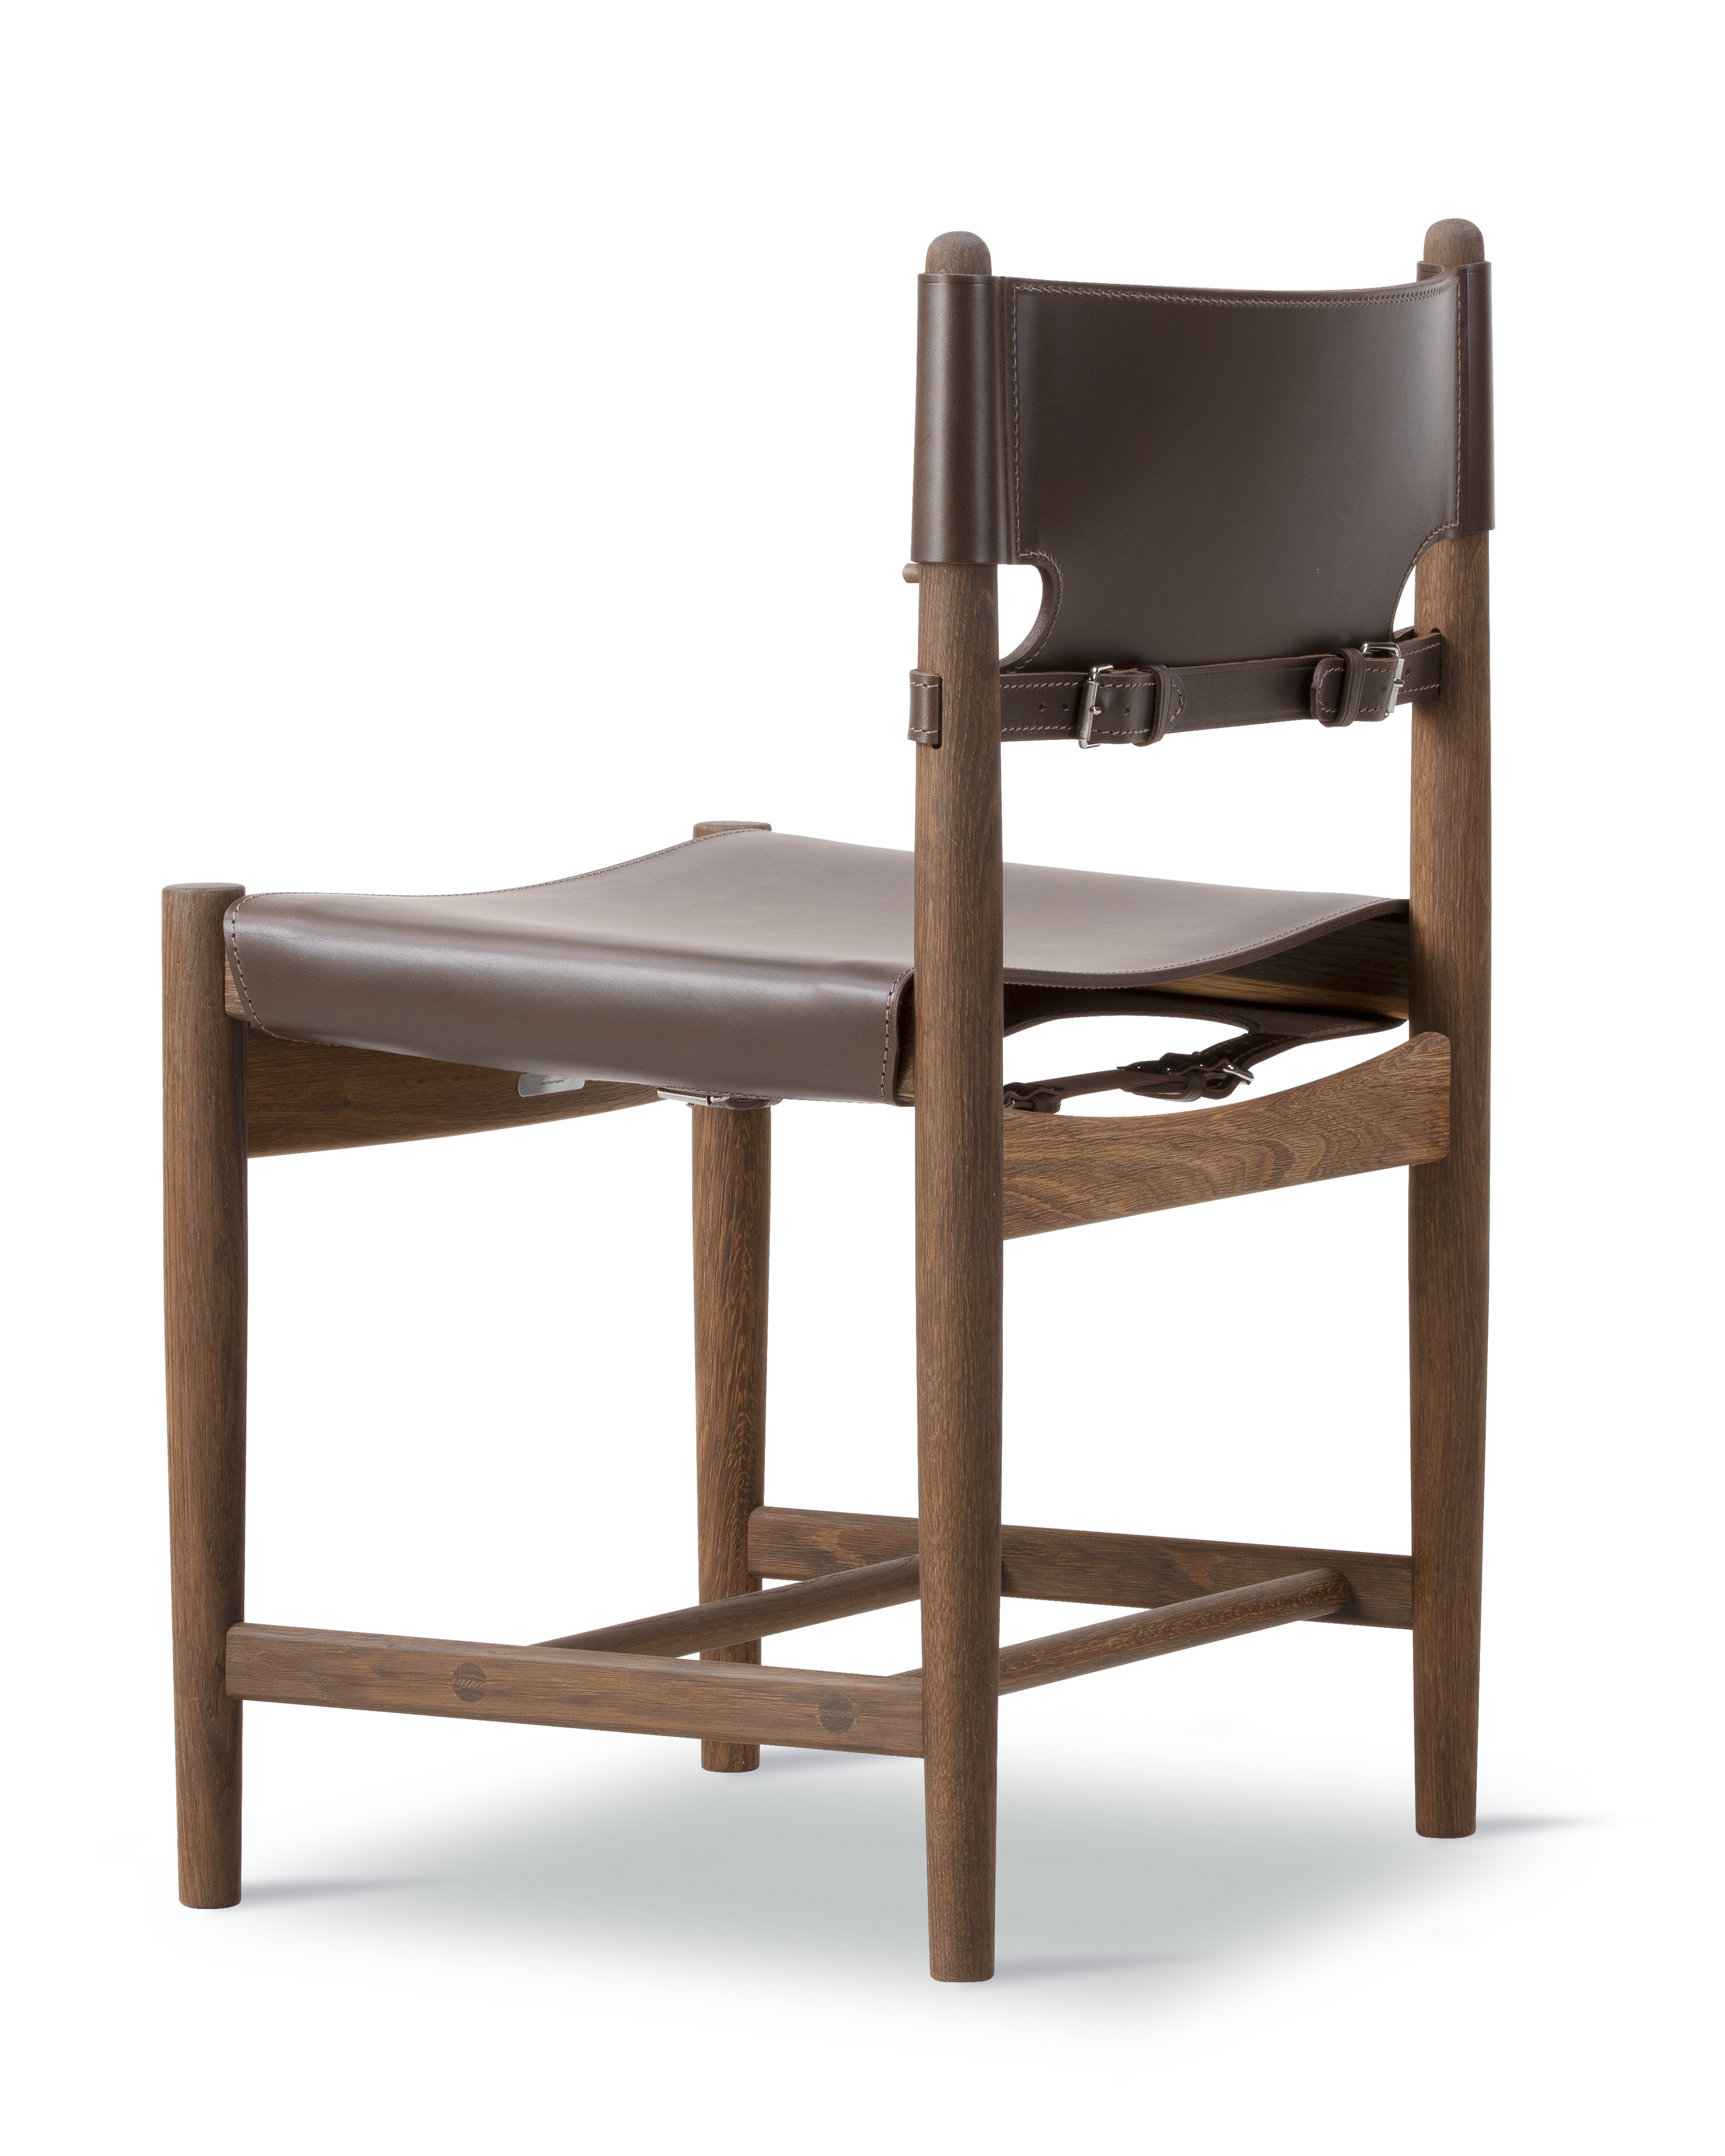 The Spanish Dining Chair - Dark Brown Leather / Smoked oak